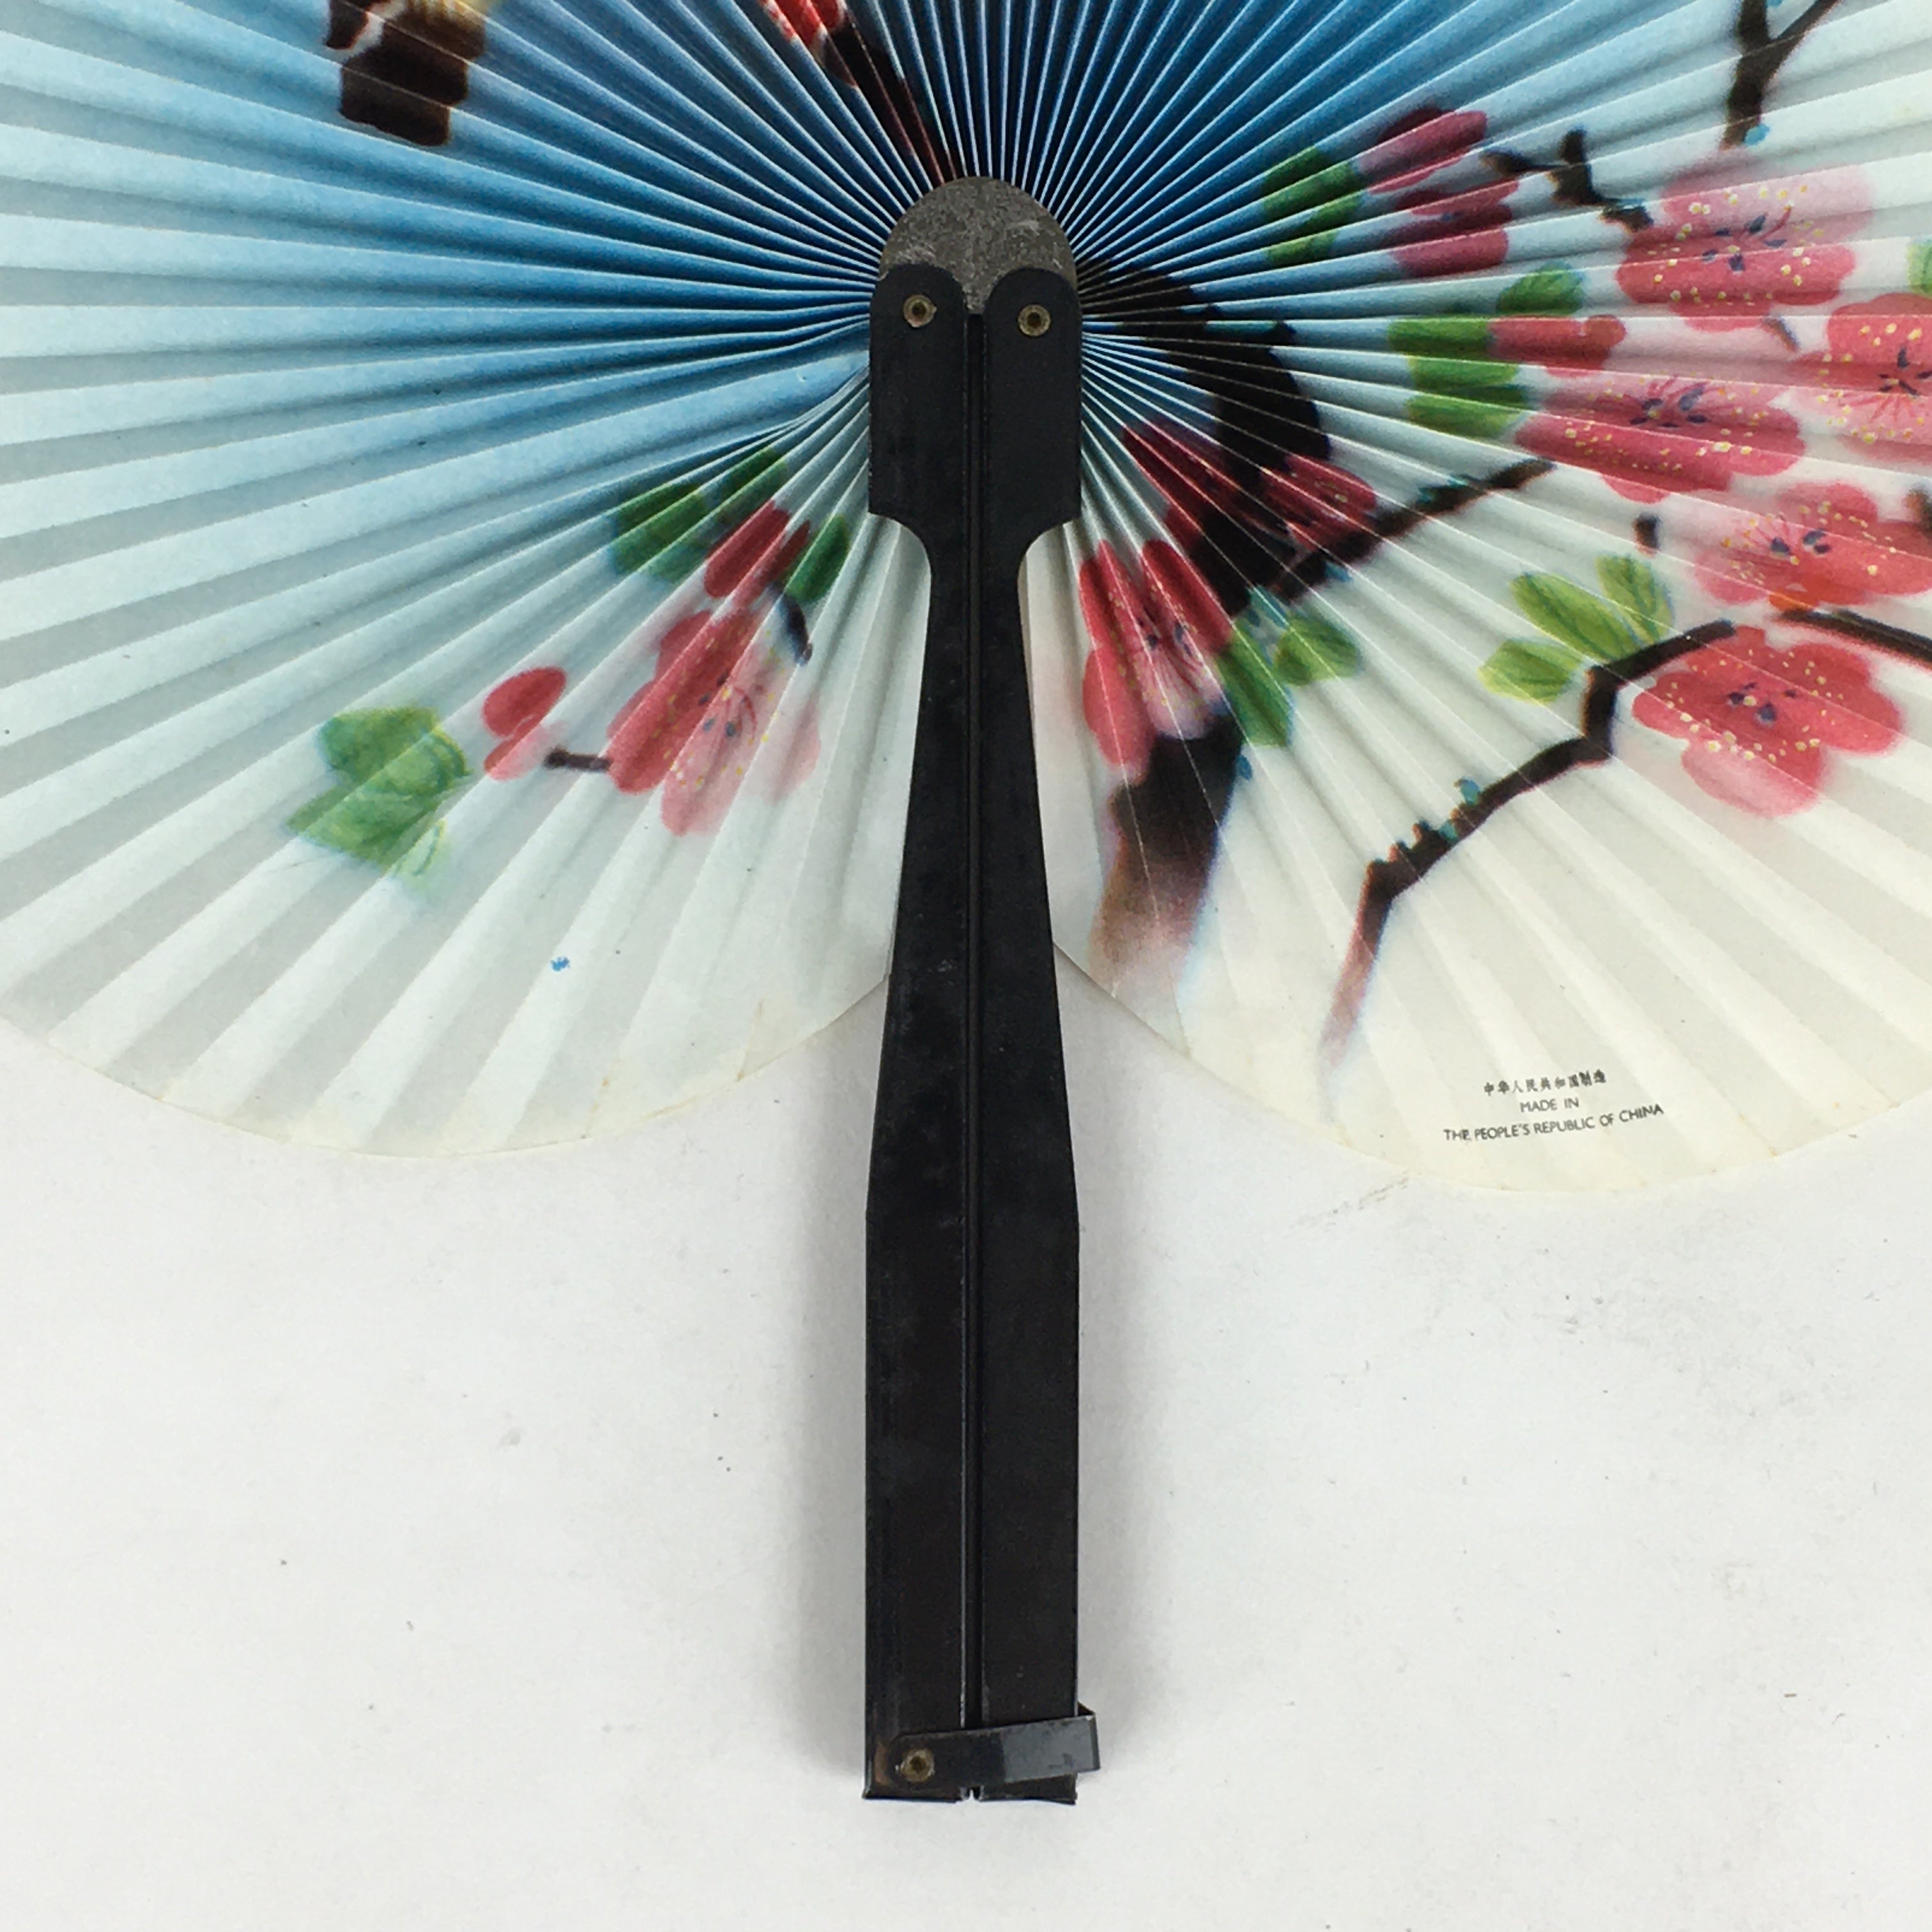 VINTAGE JAPANESE FOLDING PAPER FAN MADE IN PEOPLE’S REPUBLIC OF CHINA BIRD  - EUC